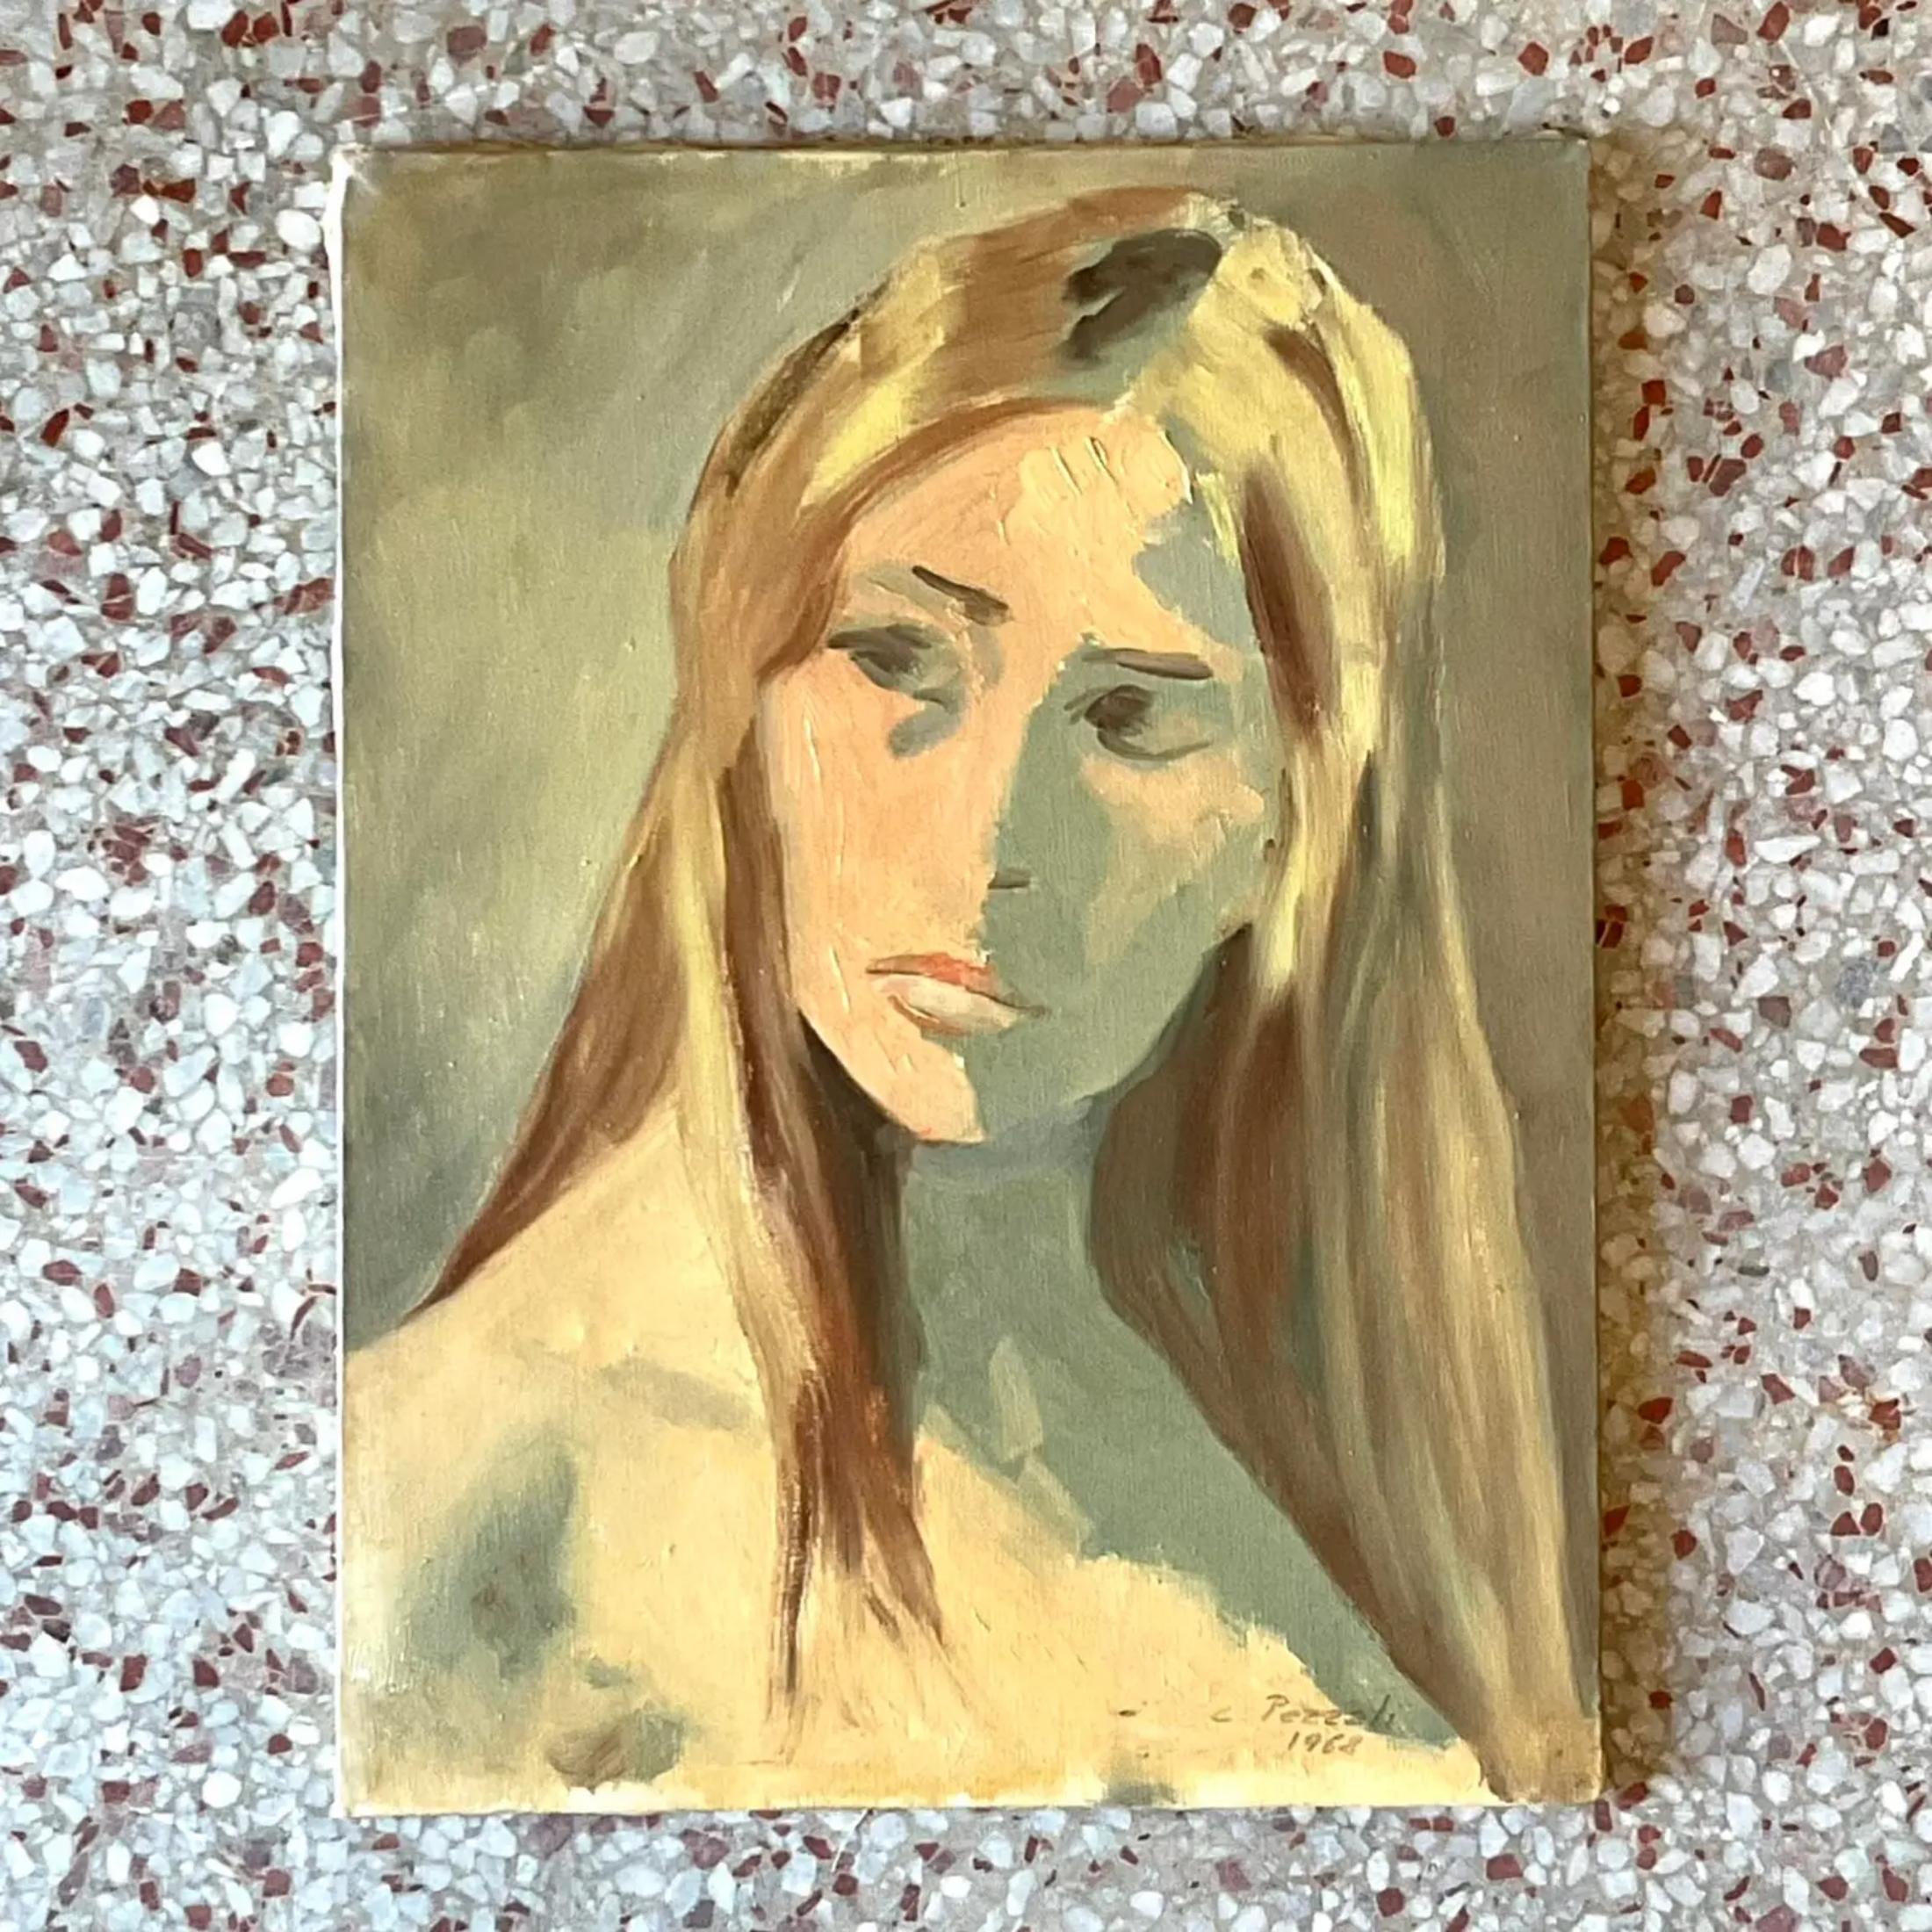 A fantastic vintage Coastal original oil painting on canvas. A chic 1960s Italian work signed by the artist. An Abstract Figural portrait in soft neutral colors. Acquired from a Palm Beach estate